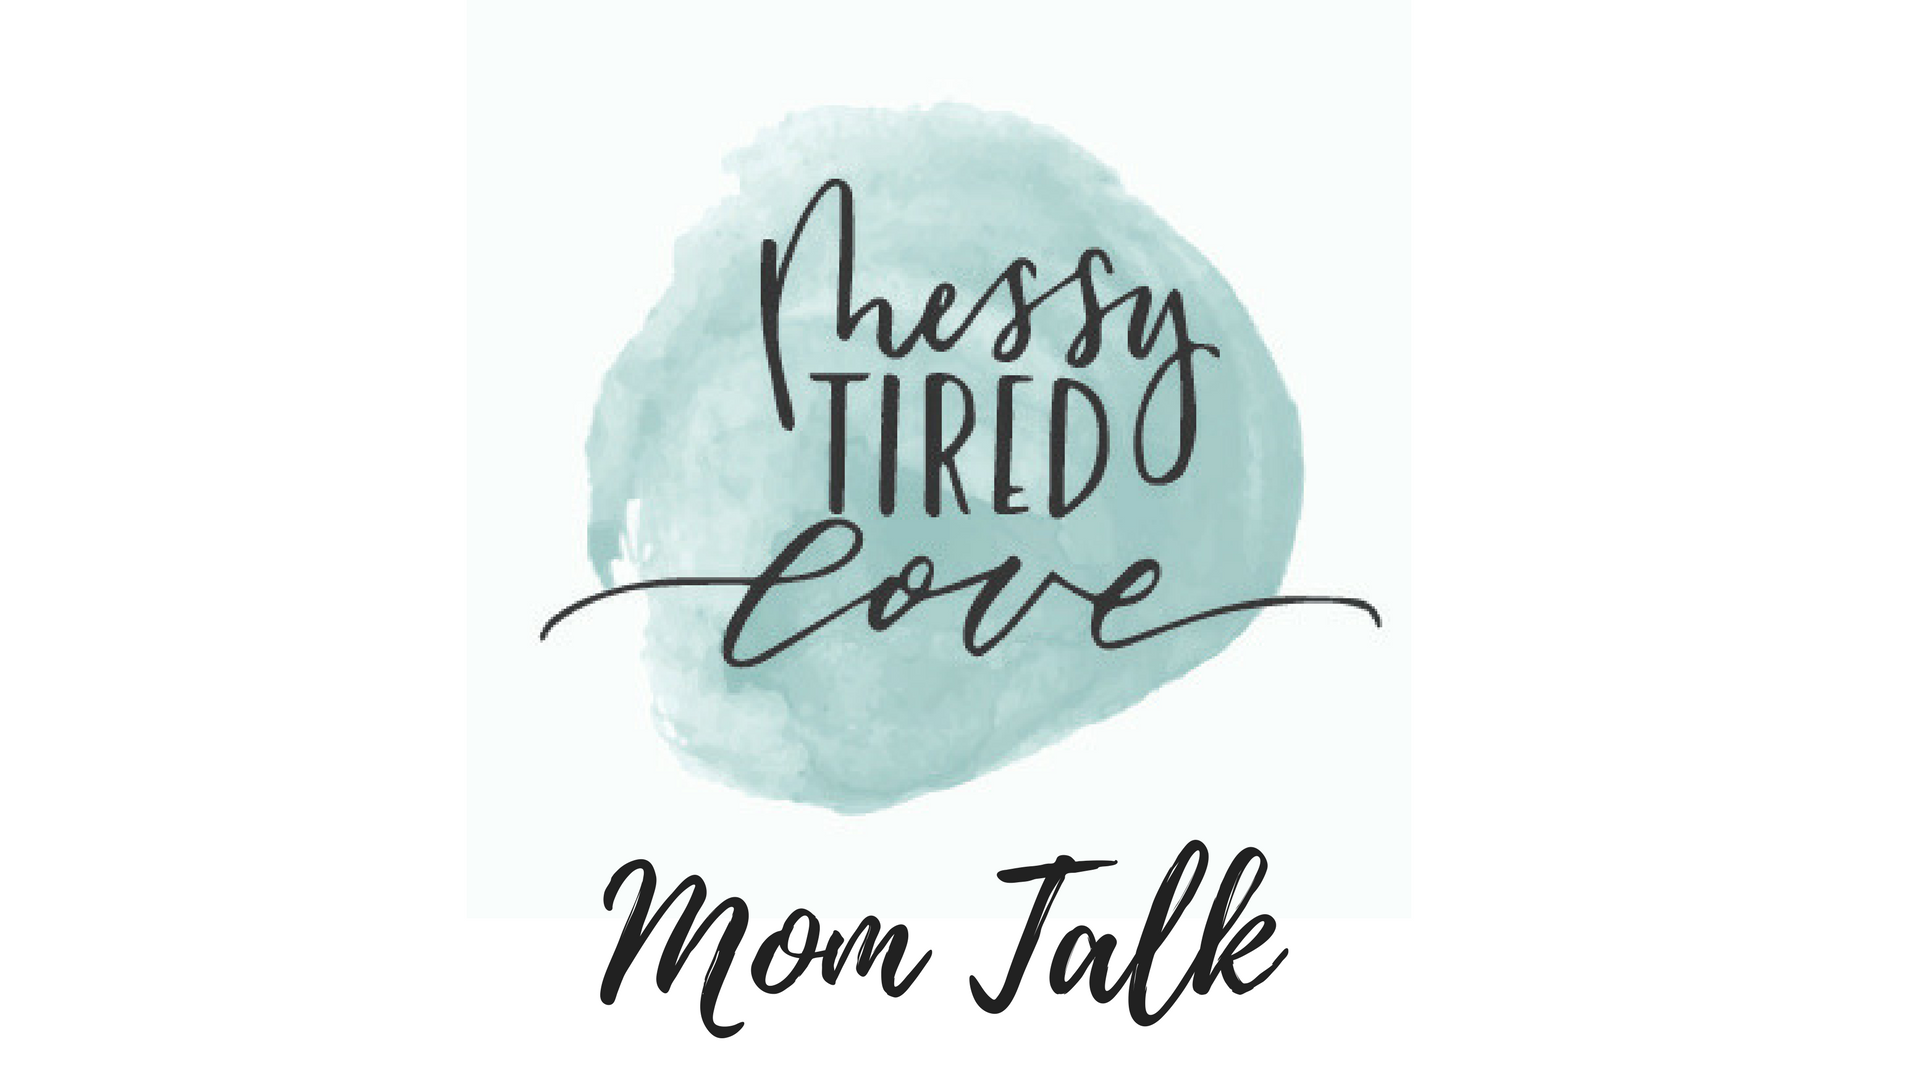 Introducing “Messy Tired Love: Mom Talk”